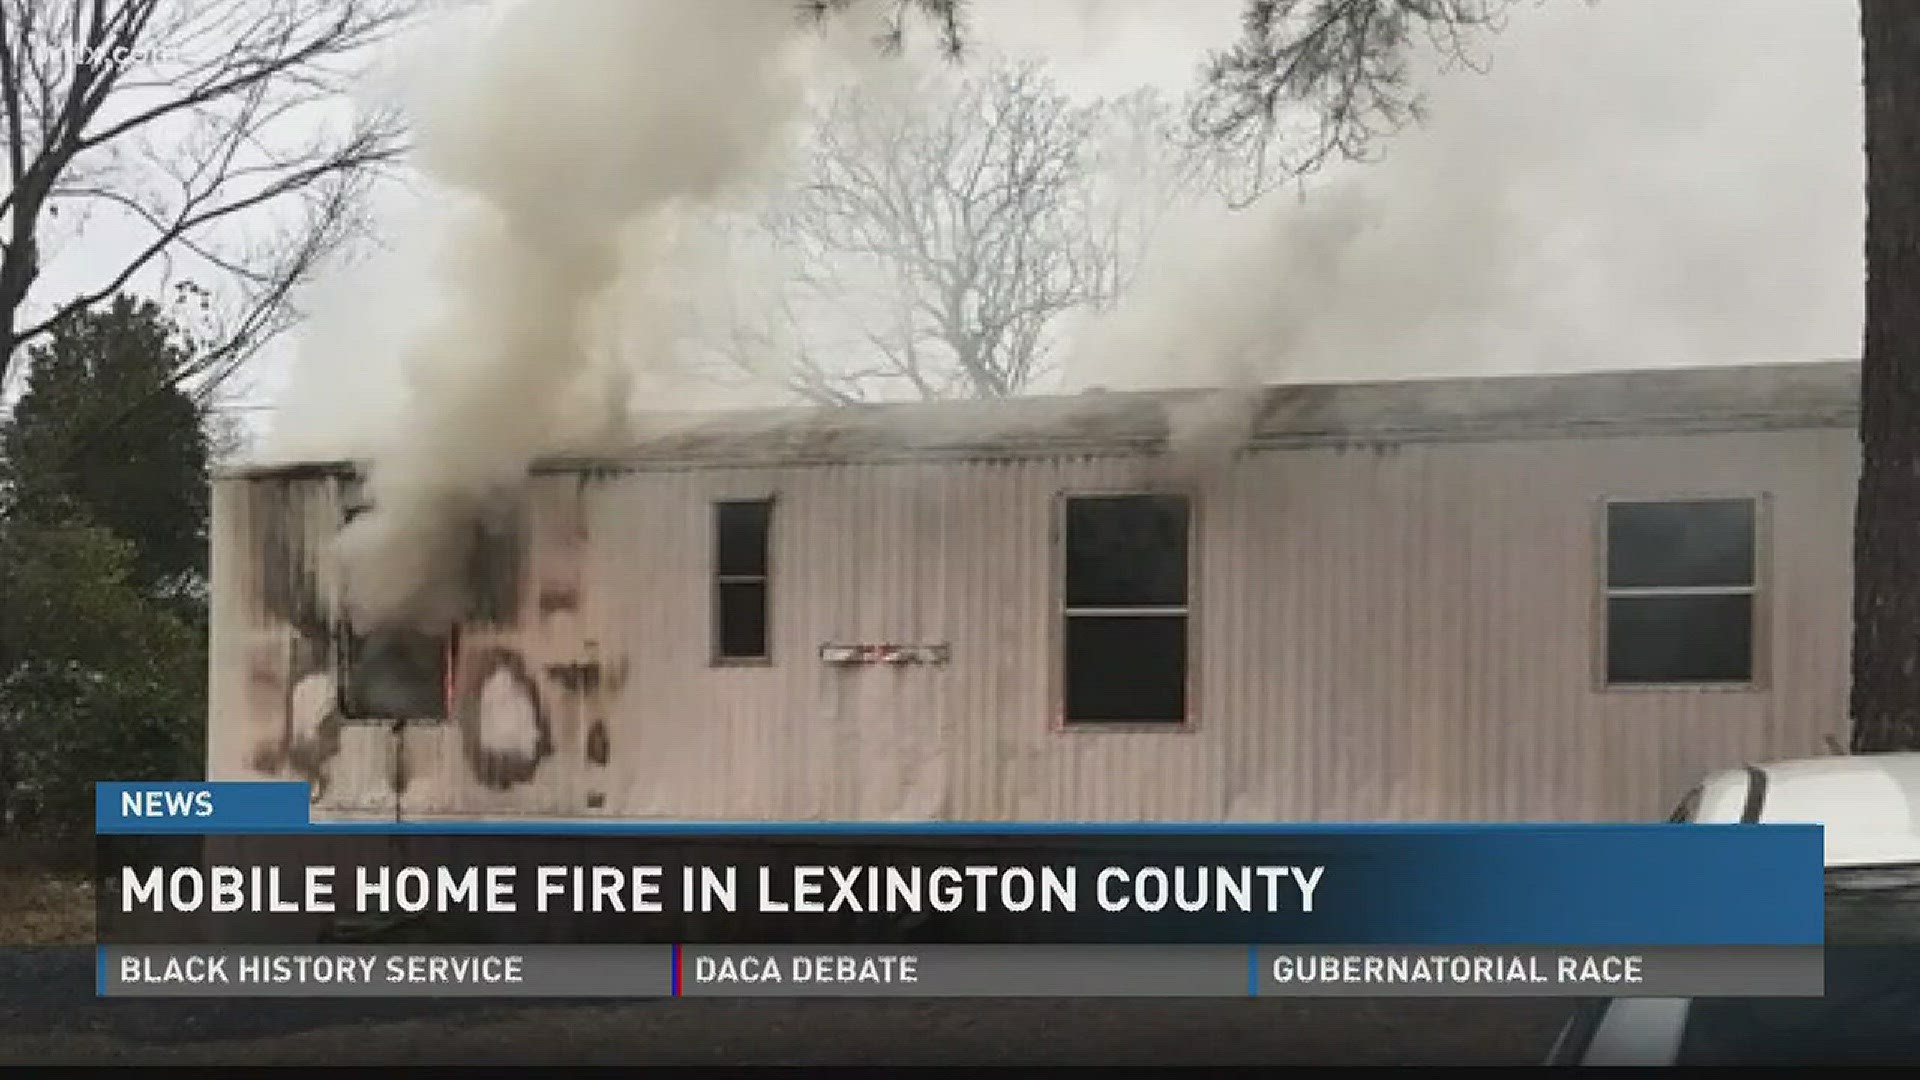 Eight people are without a home following a mobile home fire in Lexington County.